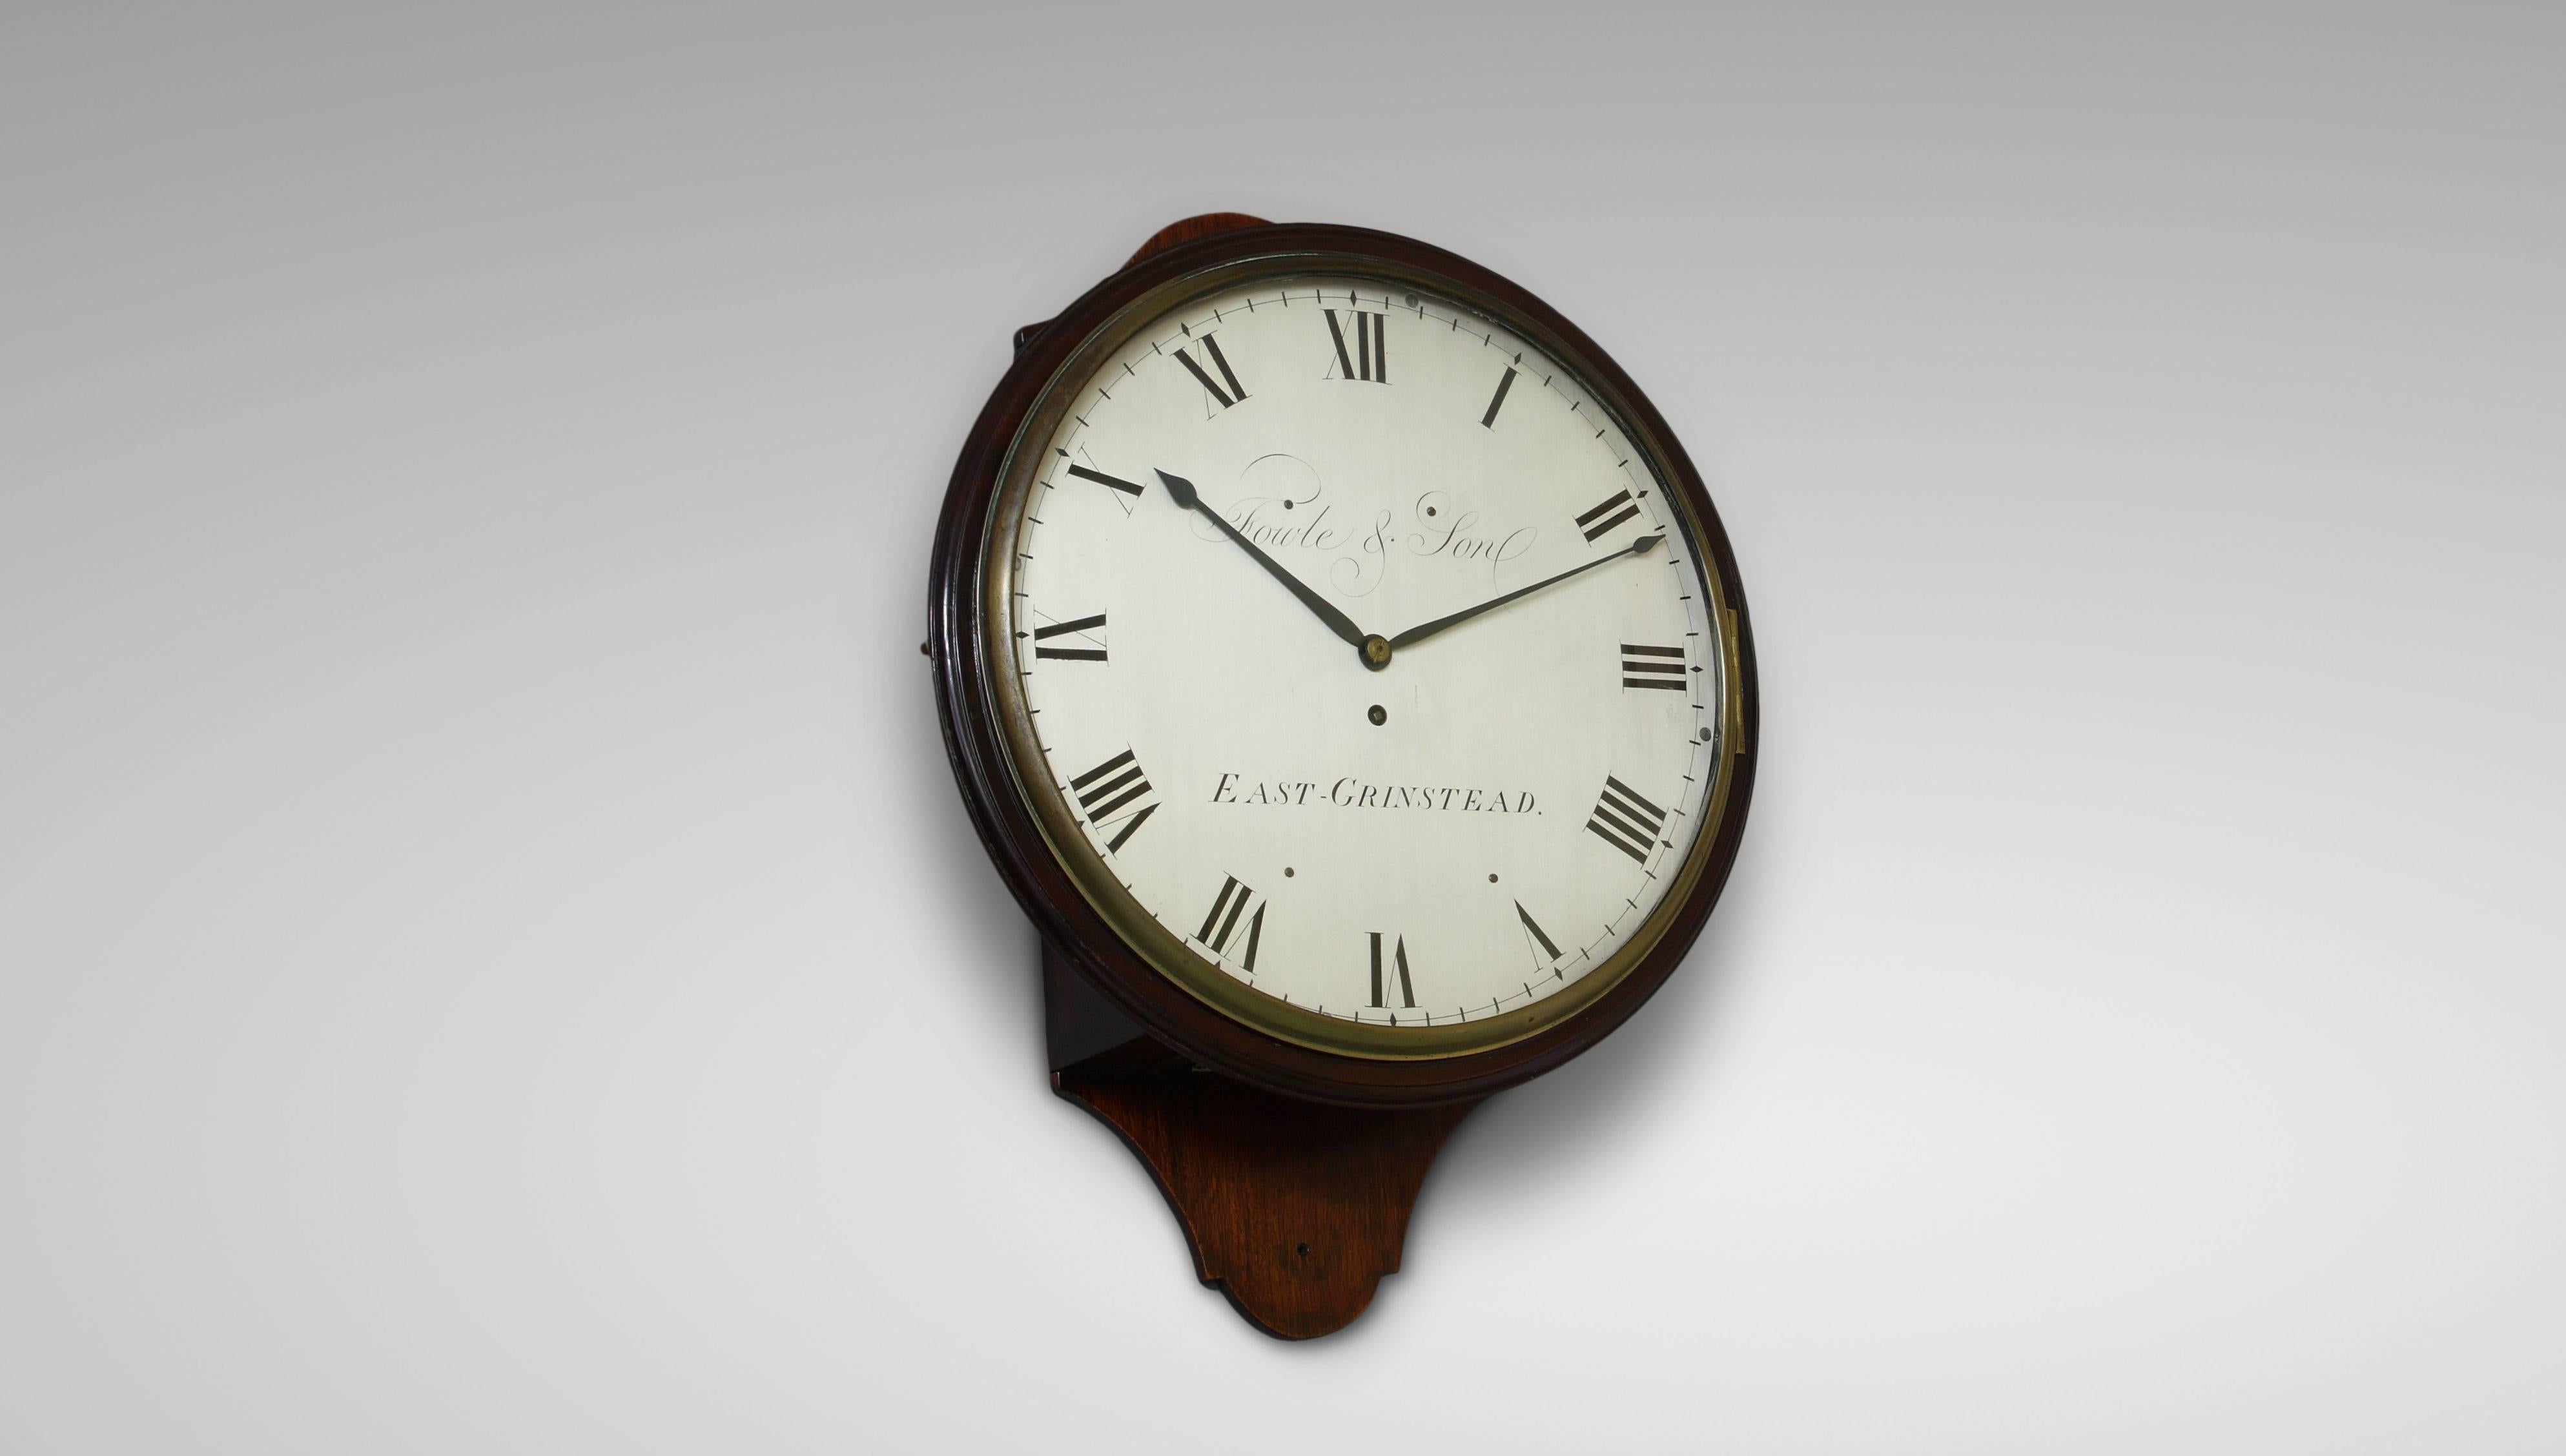 Mahogany wall timepiece, George III period, circa 1790 signed Fowle & Son, East Grinstead. Large silvered dial with Roman numerals bearing the signature, two blued steel spade hands. Mahogany salt box case, cast brass bezel and access clipped doors